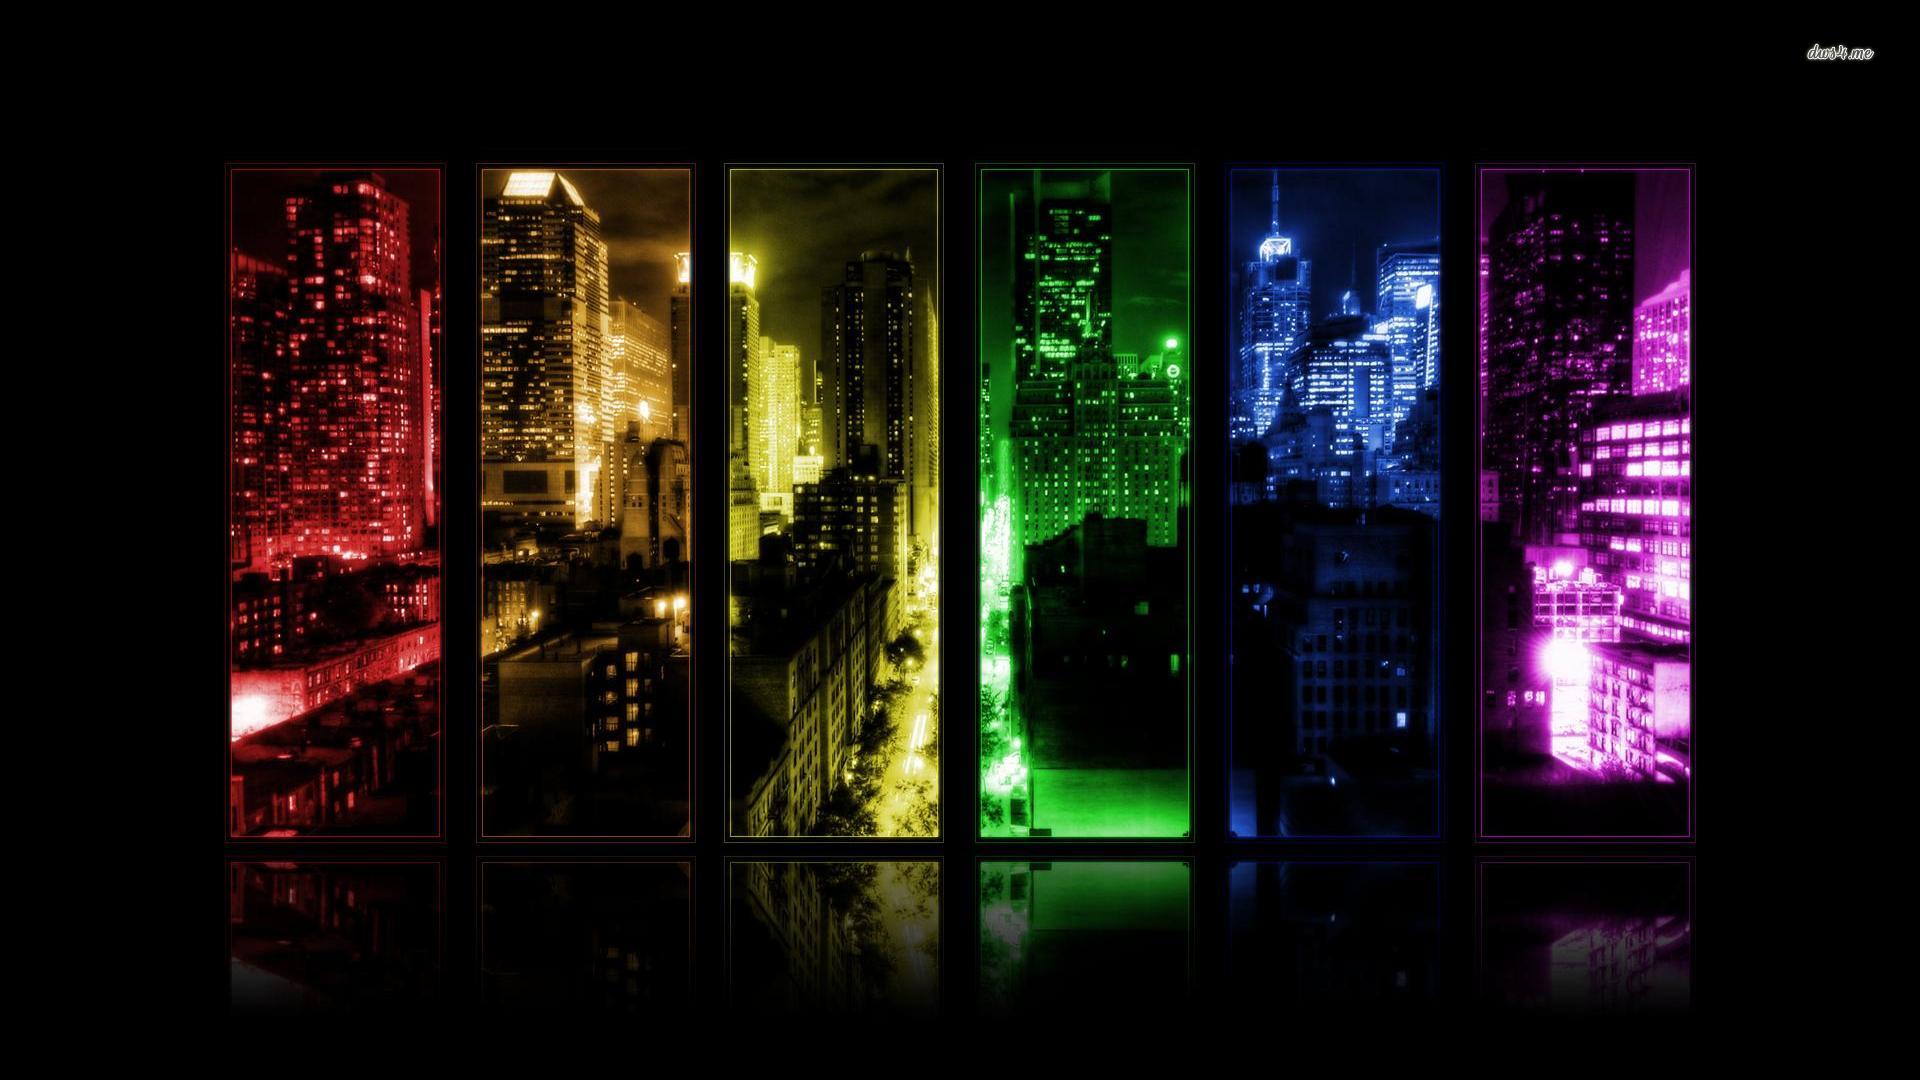 imagescicomimg201313abstract city lights 3618 hd wallpapersjpg 1920x1080